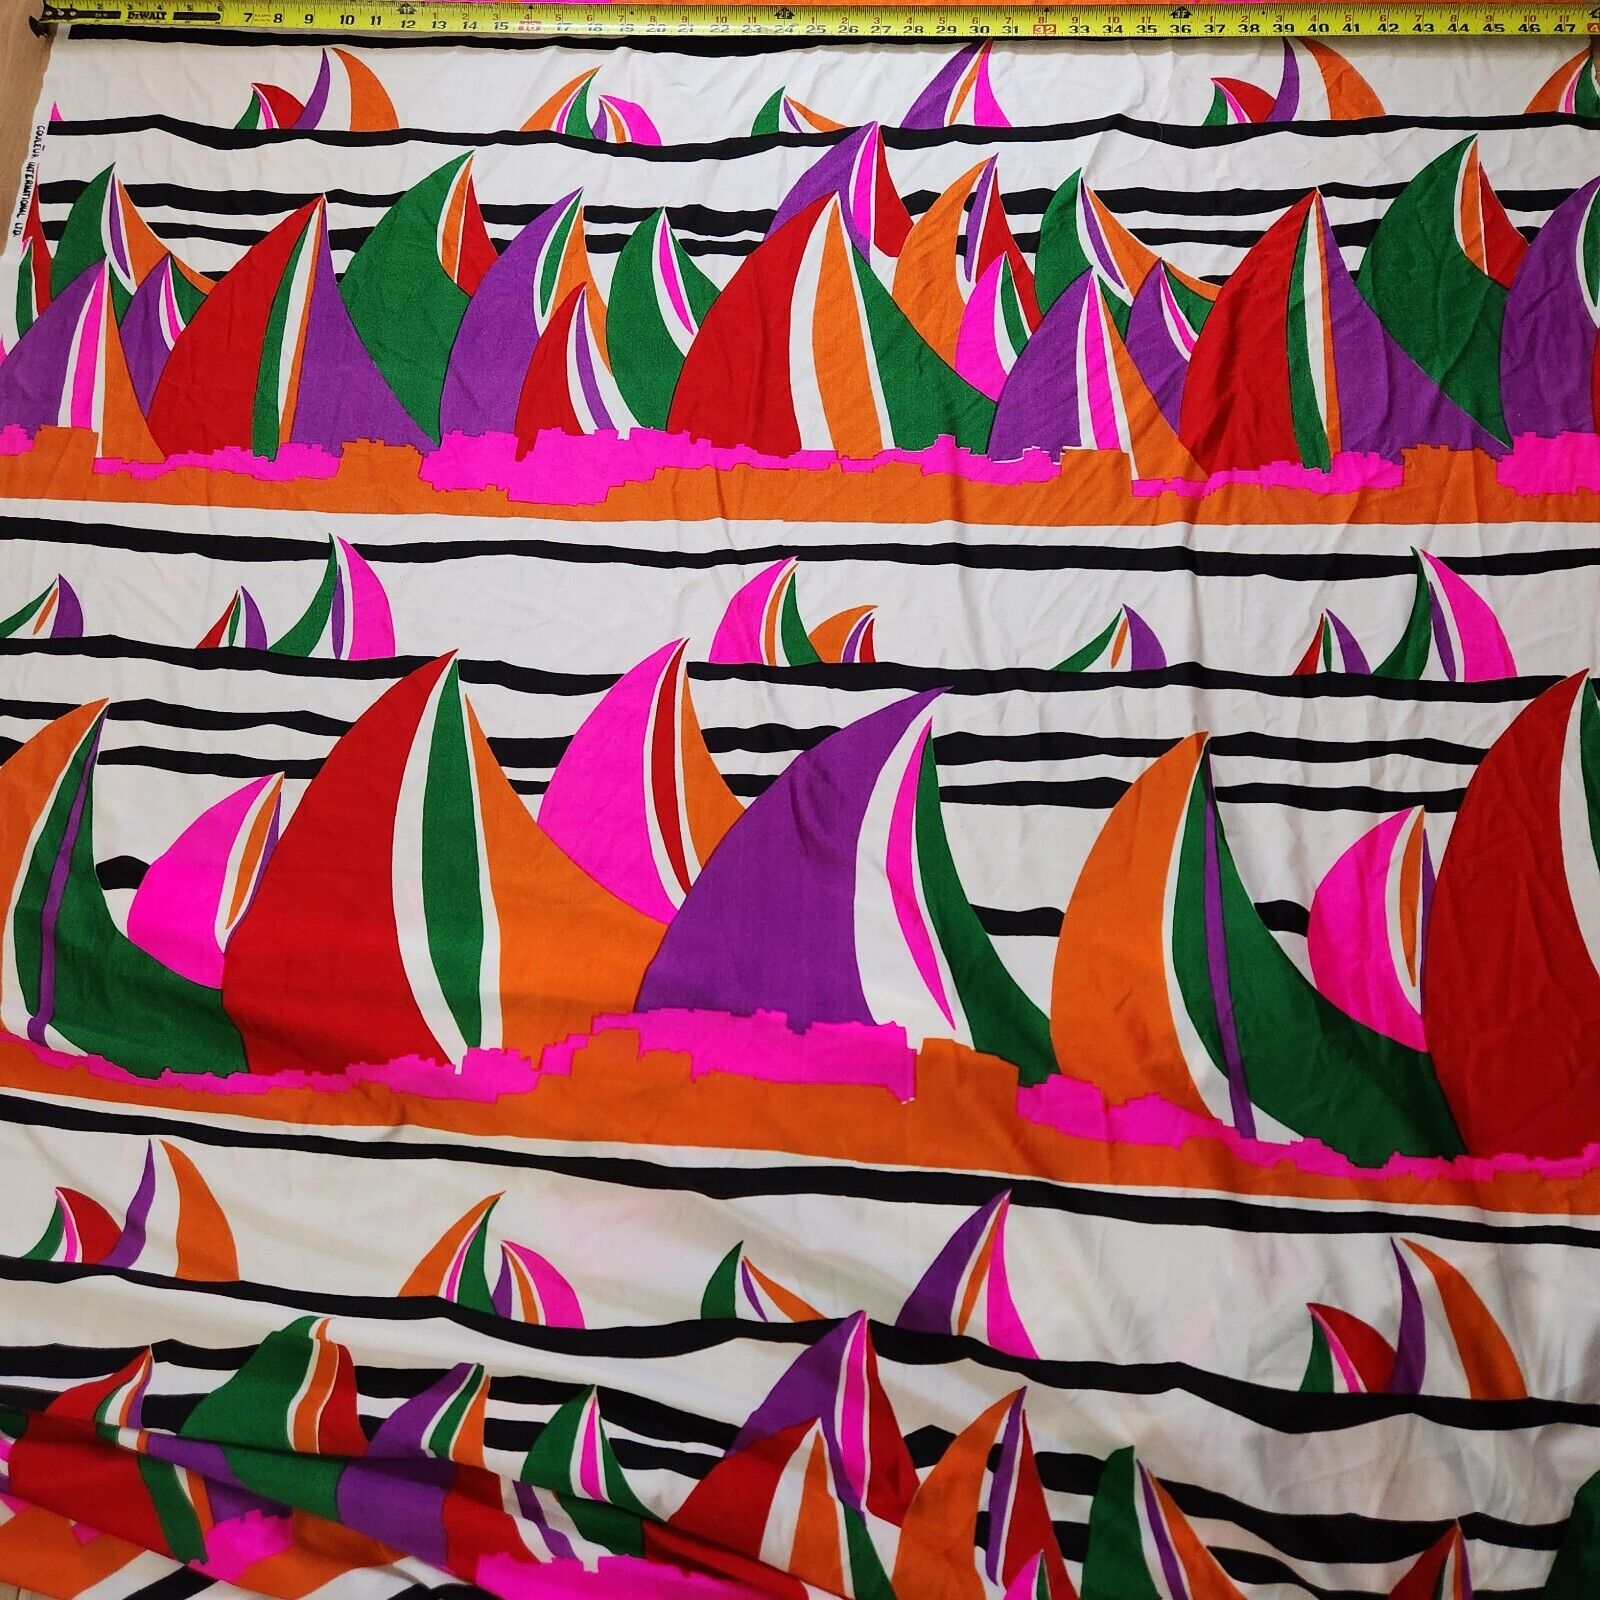 Couleur Int'l VTG Retro Raw Poly Fabric Colorful Sailboats 3-1/8 YD 48